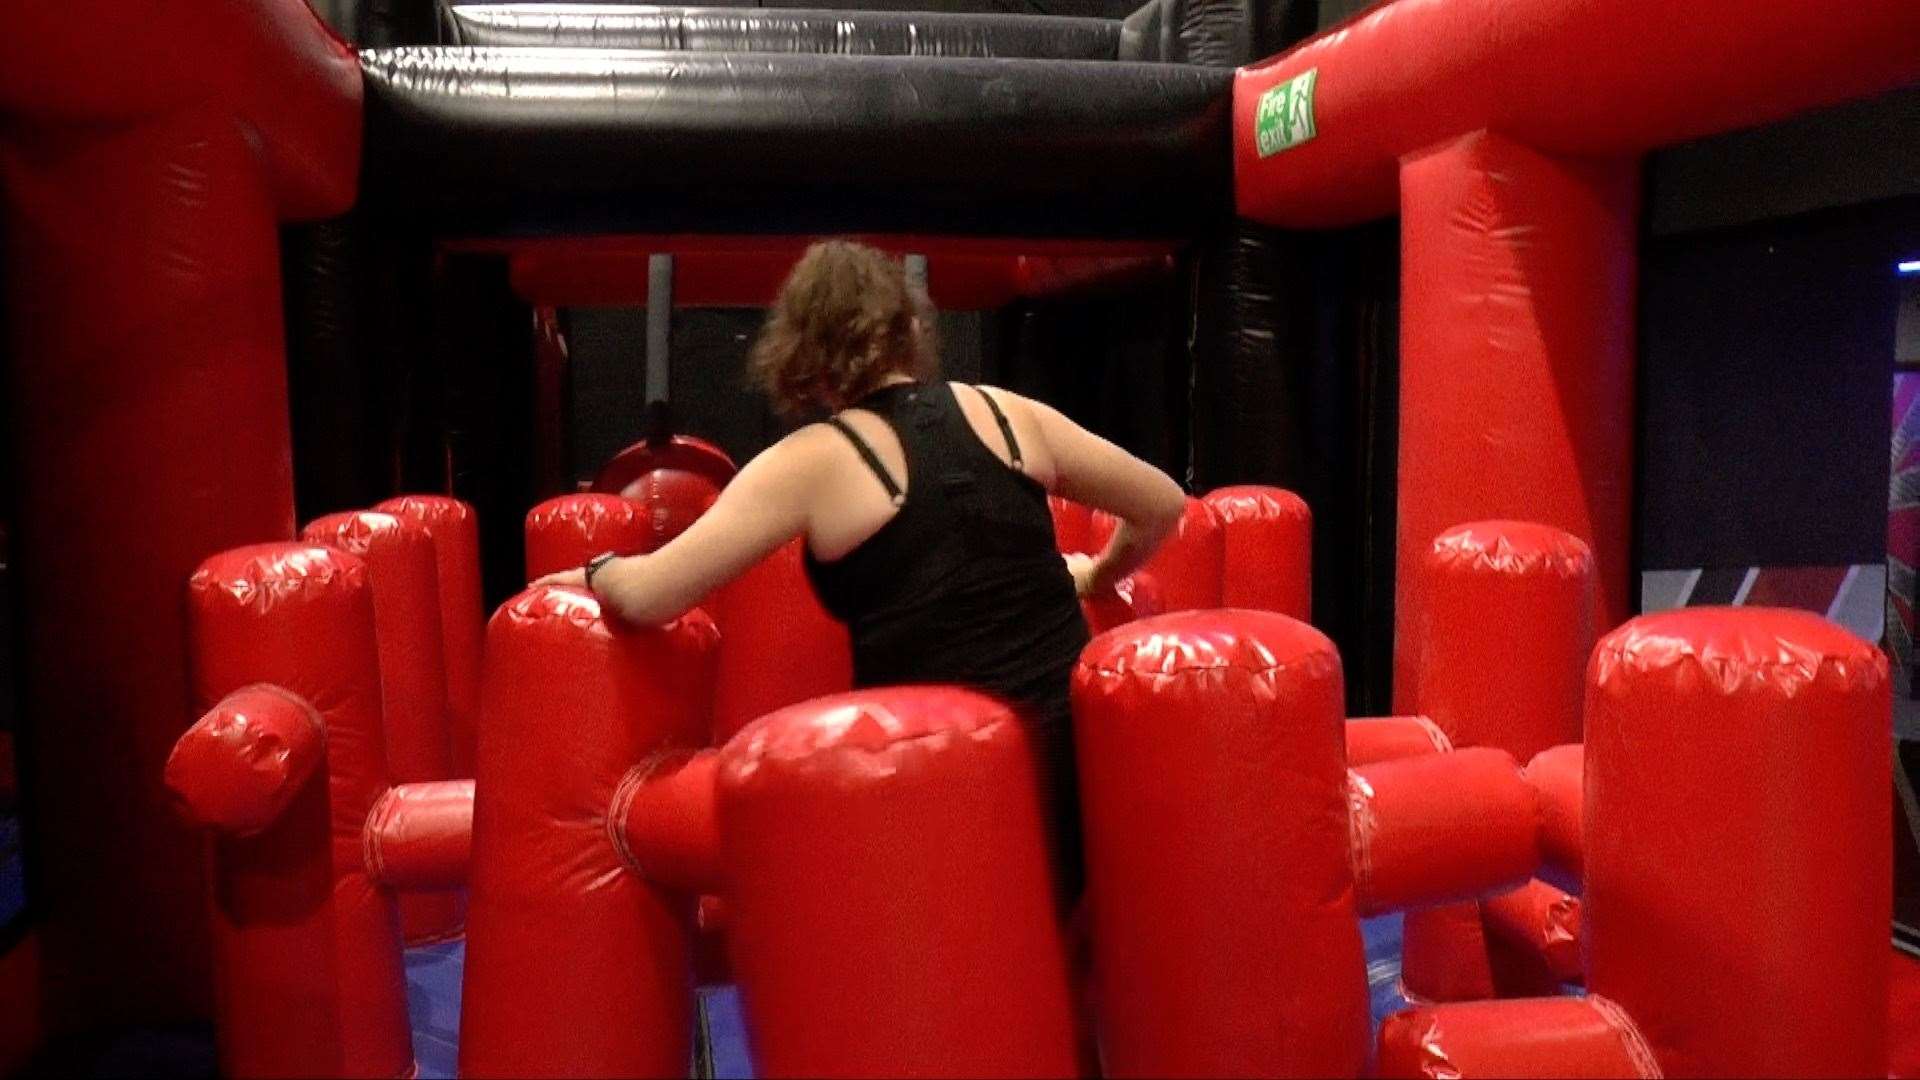 Megan struggled with the inflatables